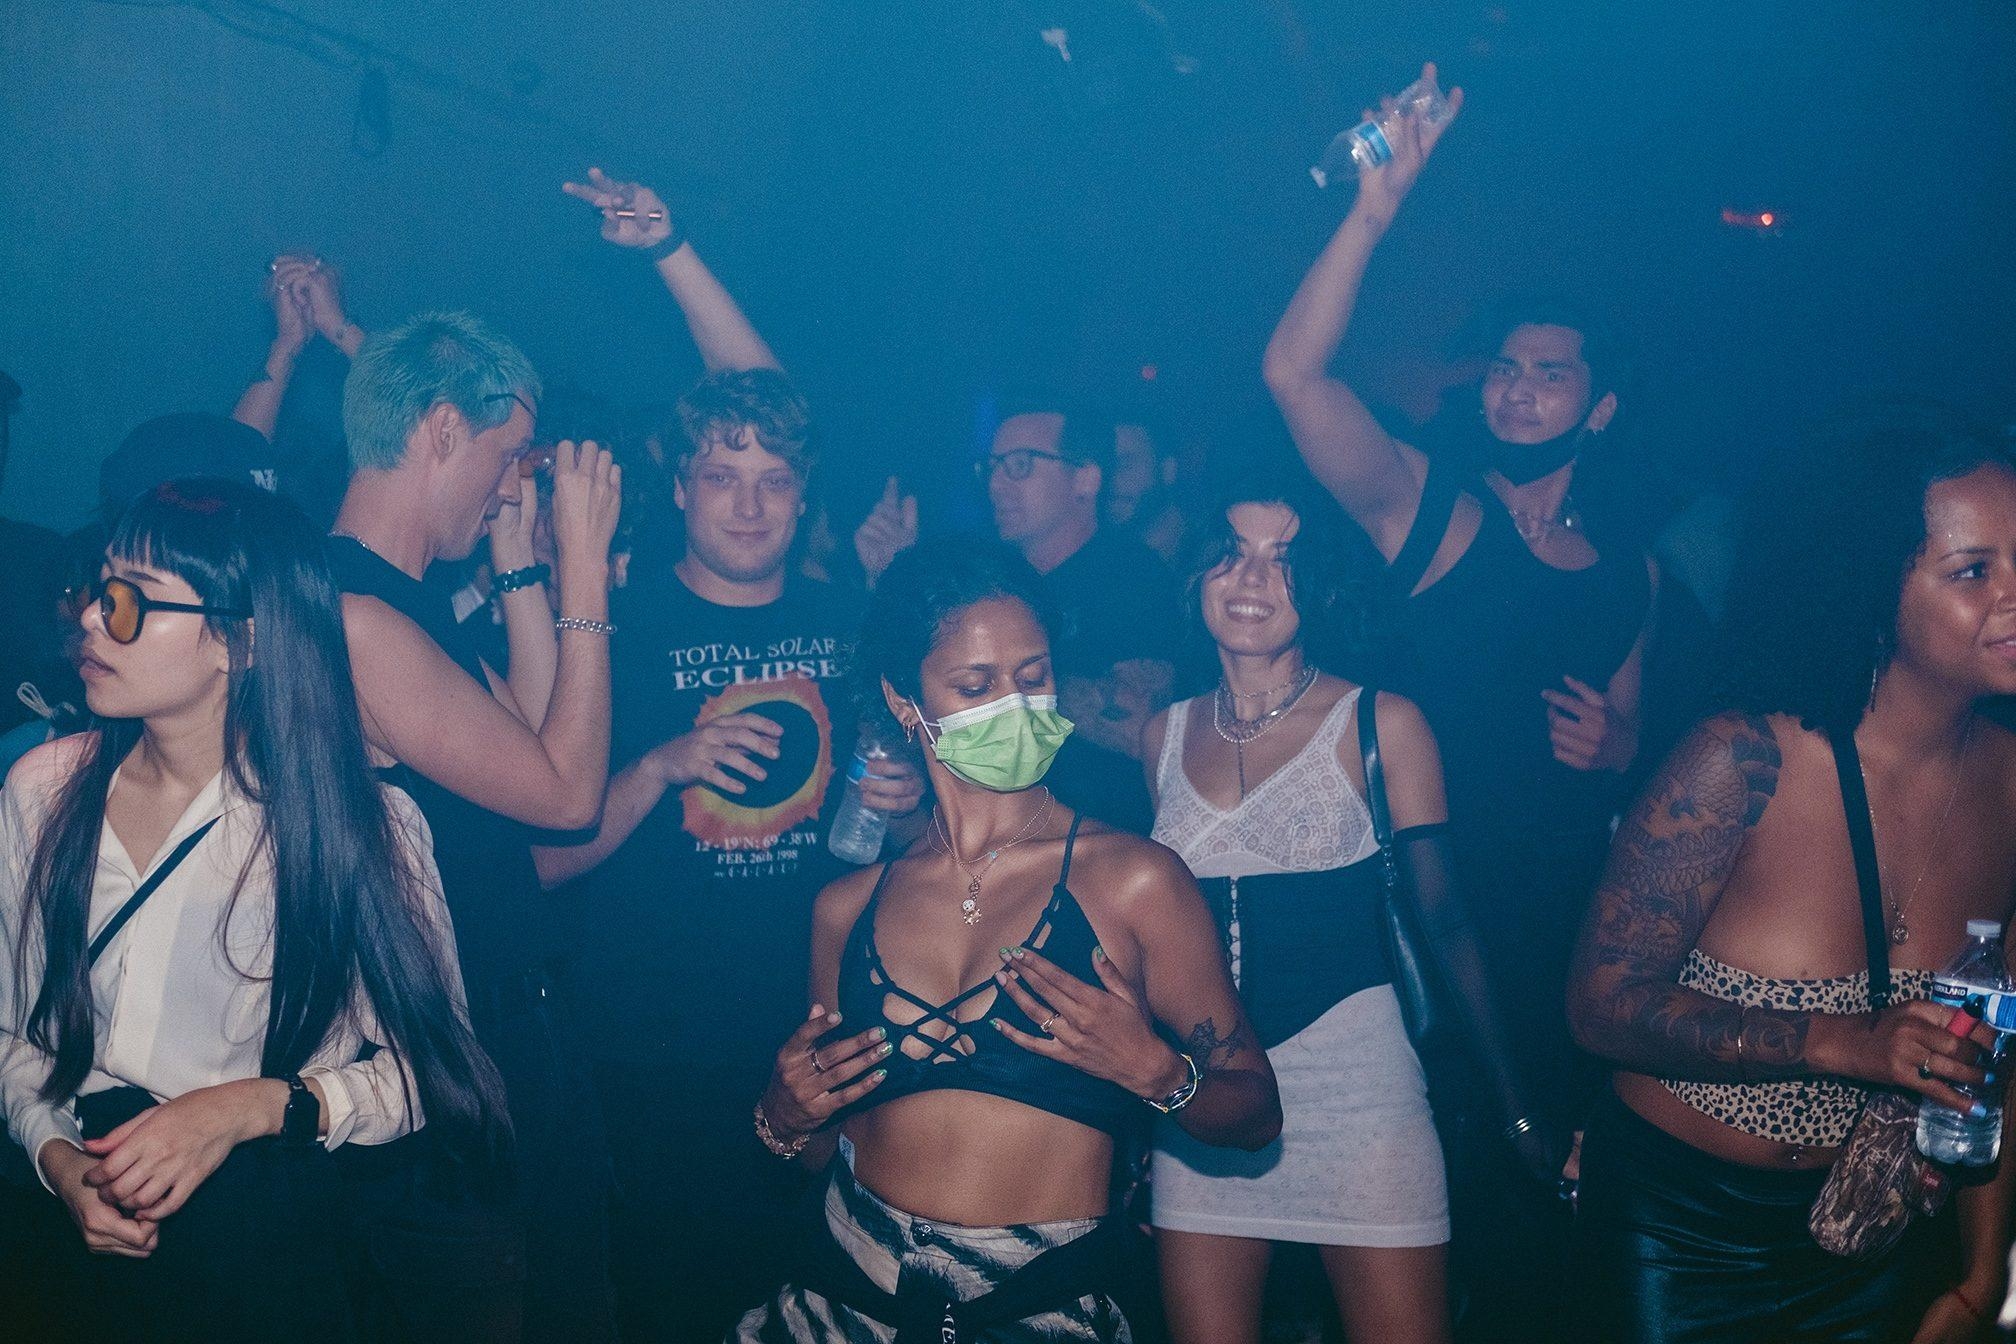 Wild Wild West After the pandemic, LAs rave underground bounces back stronger than ever - Features picture